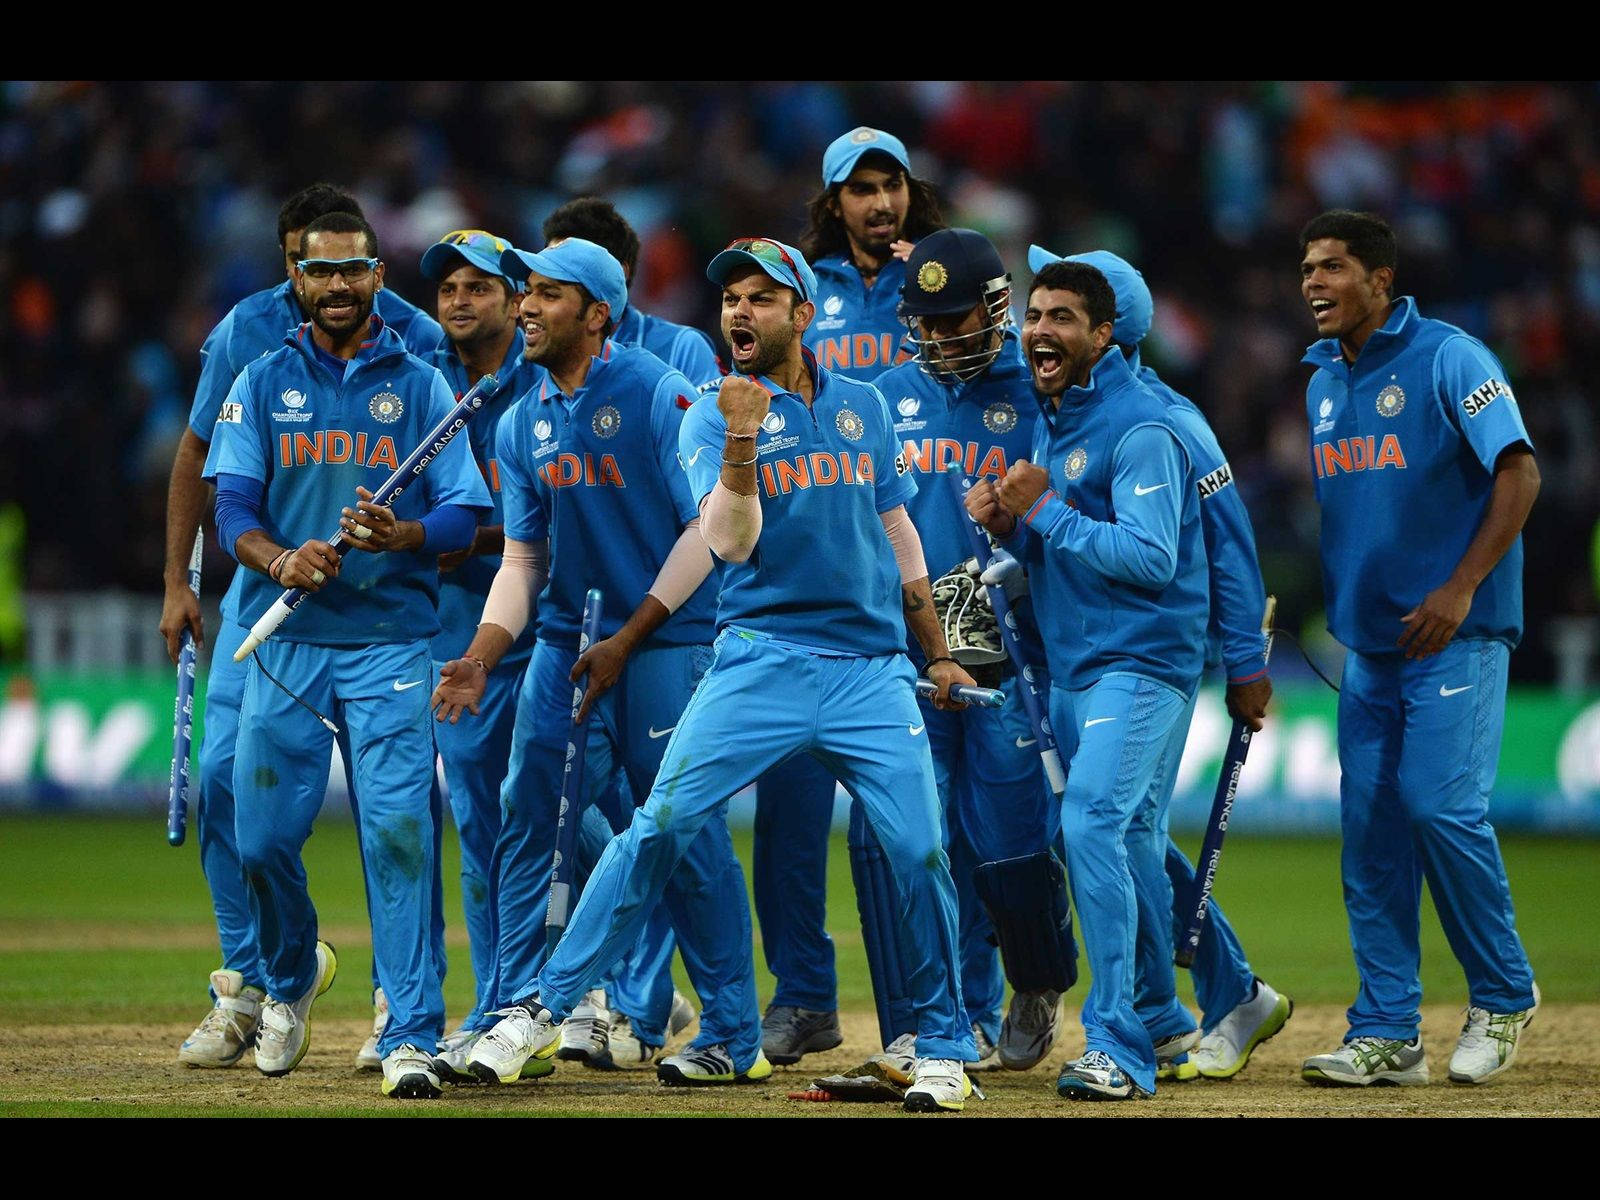 Triumph of the Indian Cricket Team Wallpaper